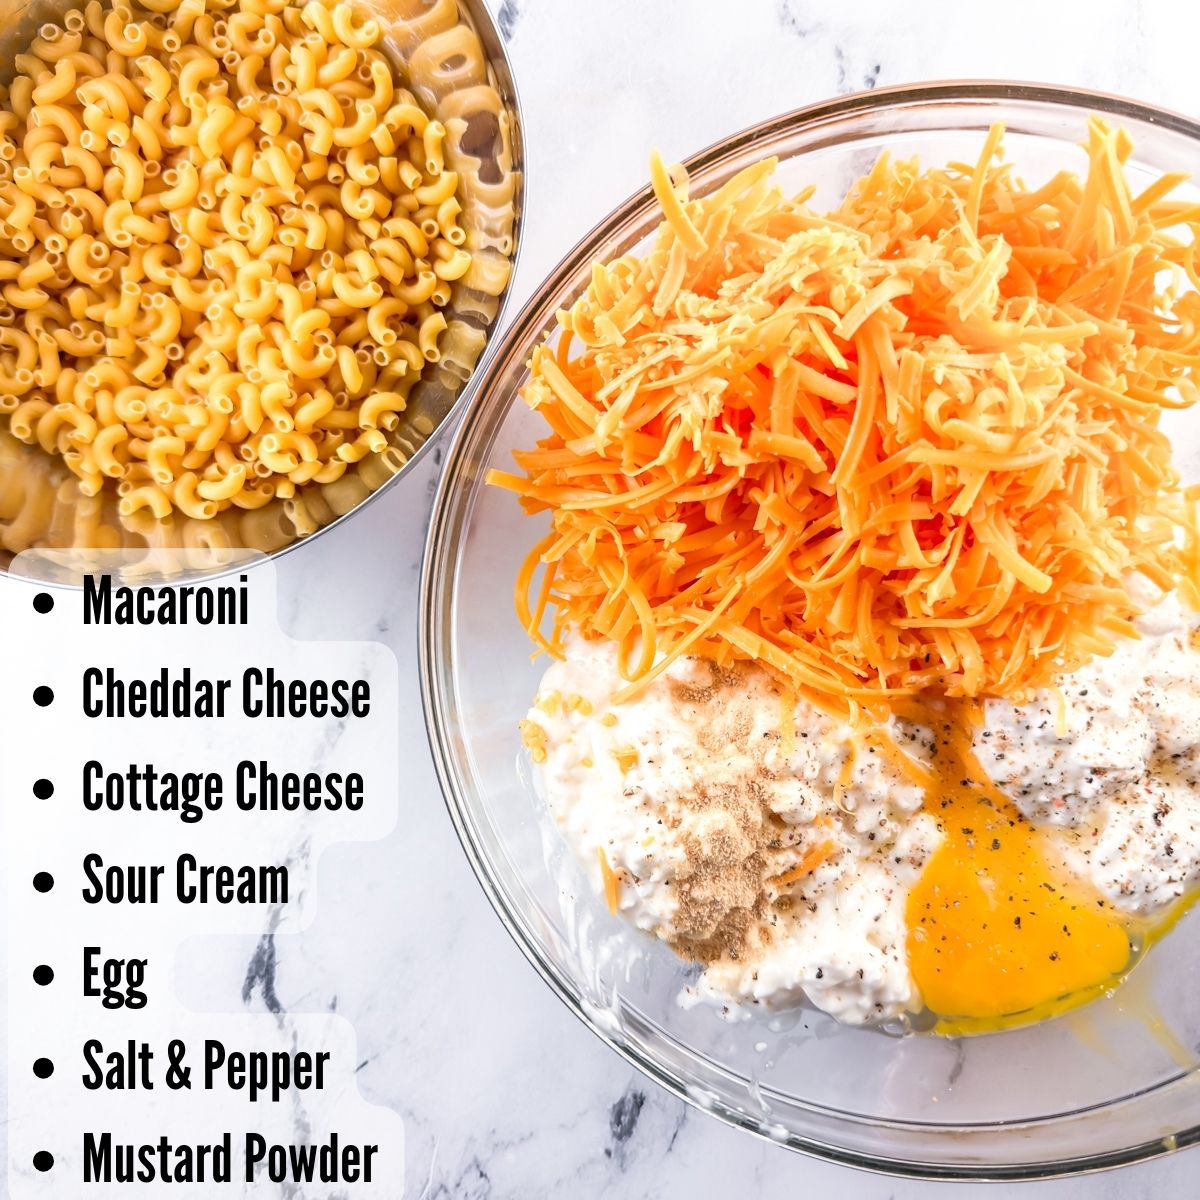 Ingredients used to make the baked macaroni and cheese in bowls.